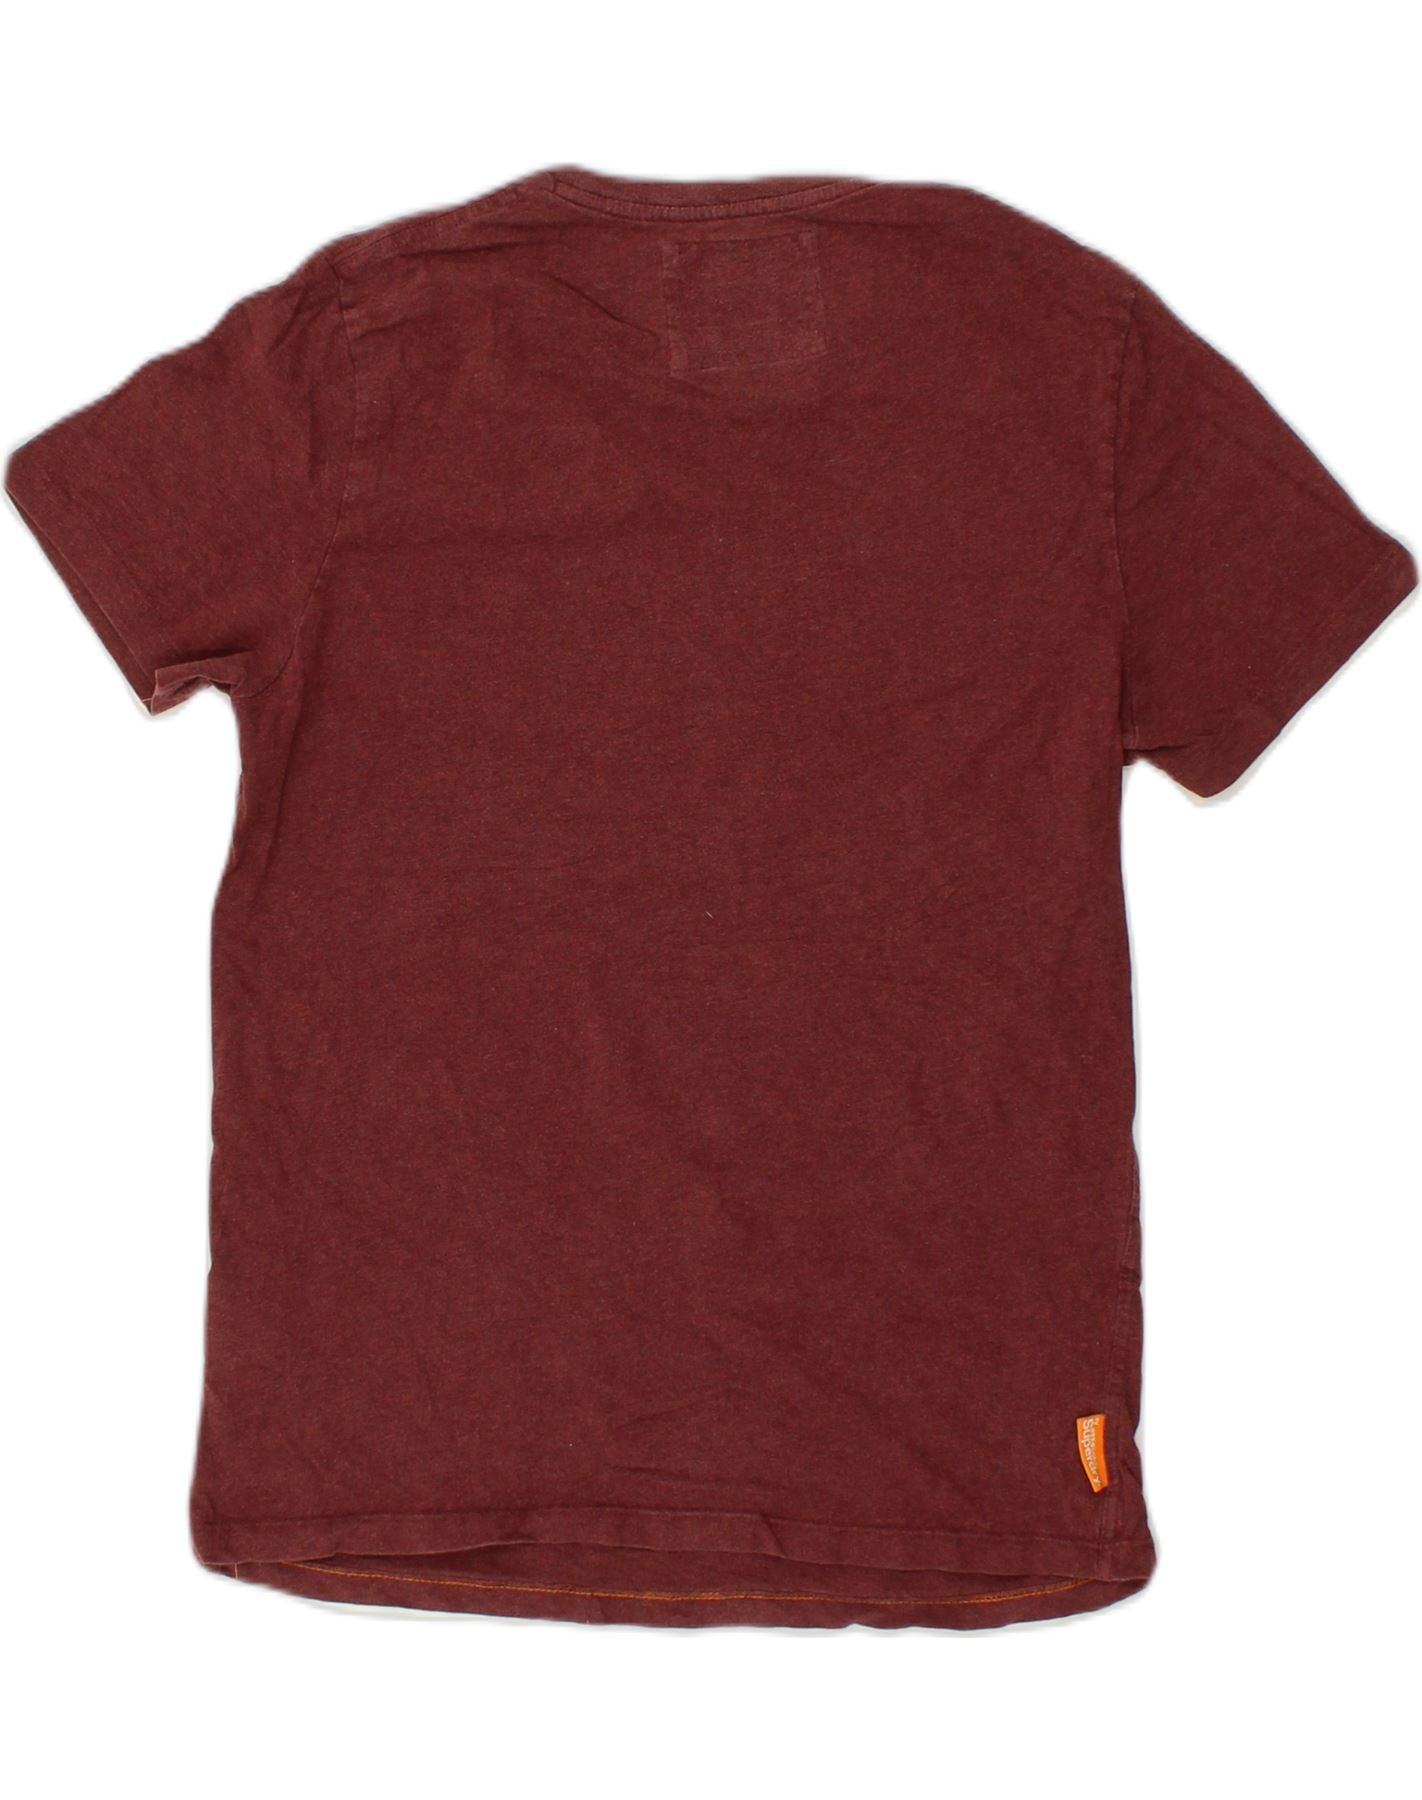 SUPERDRY Mens T-Shirt Top Medium Maroon Cotton, Vintage & Second-Hand Clothing  Online